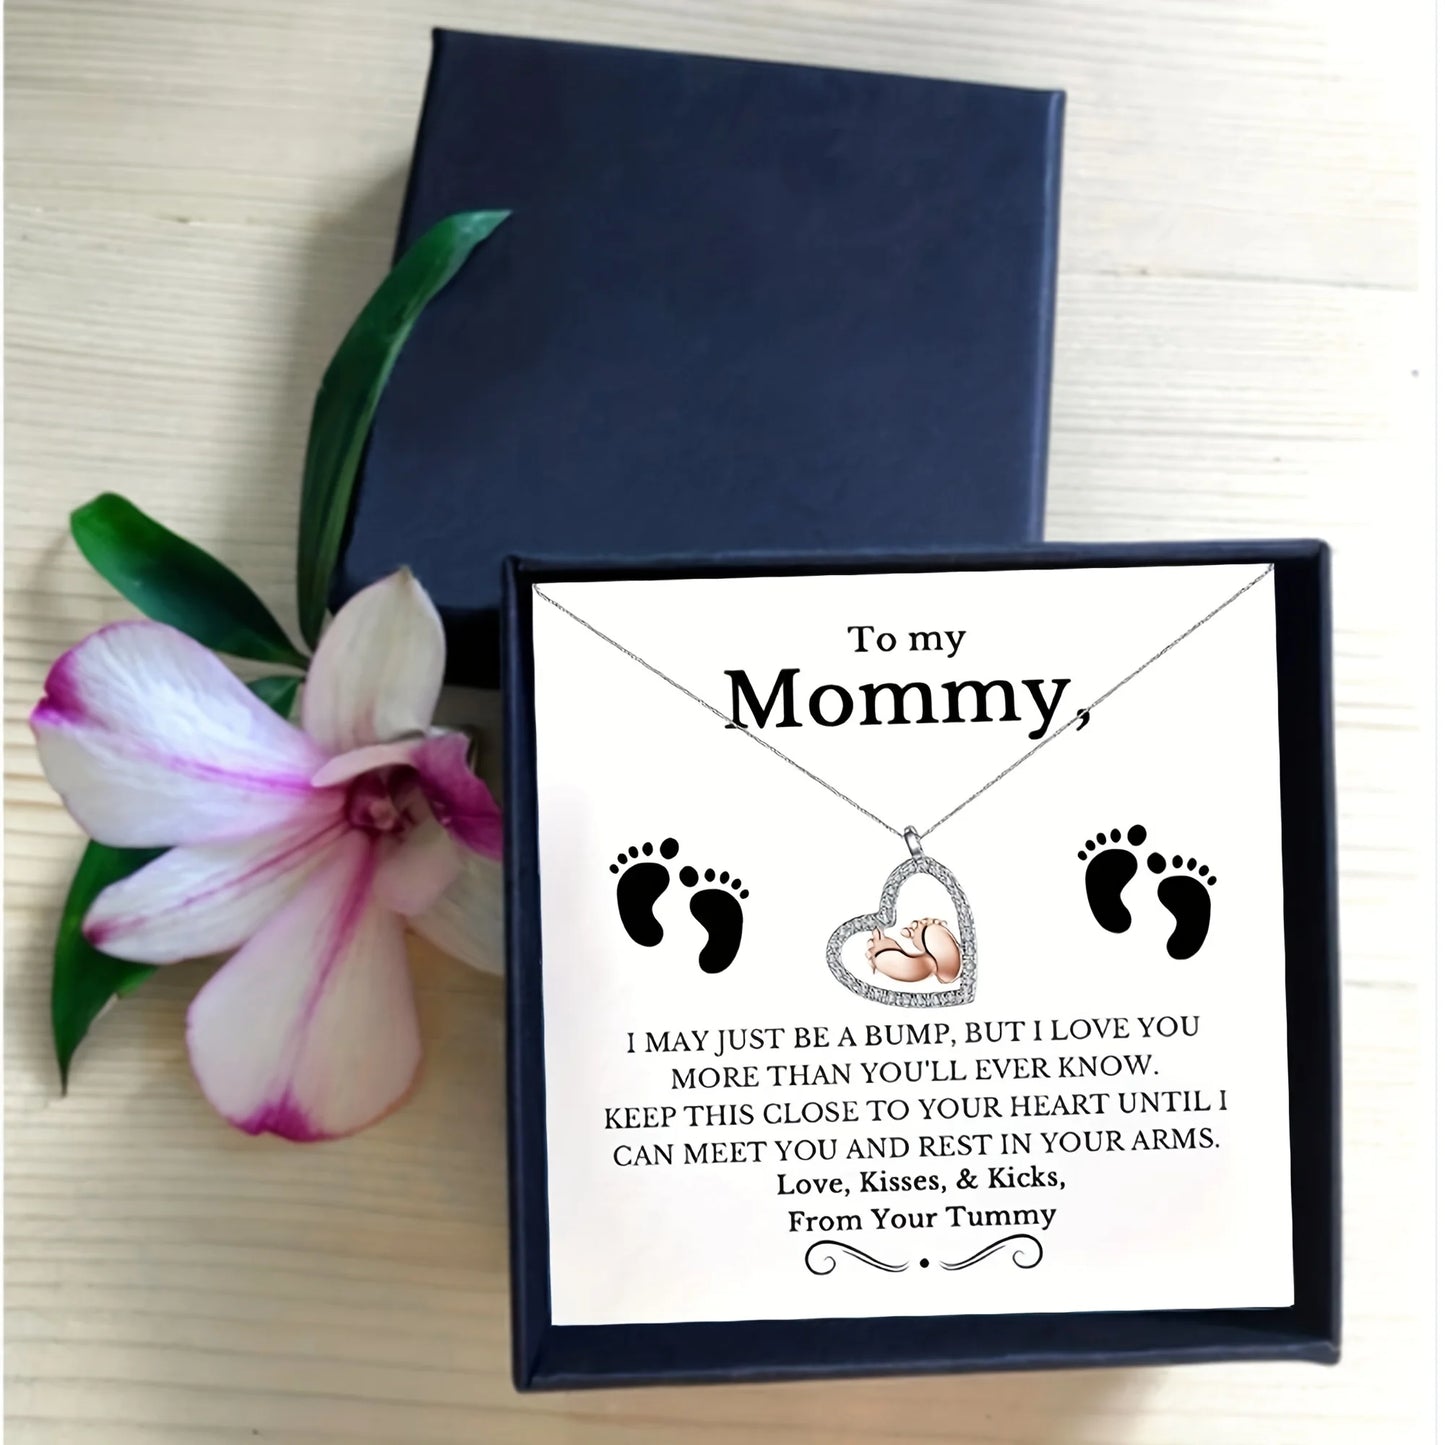 Mother's Day "To Be Mommy" Necklace